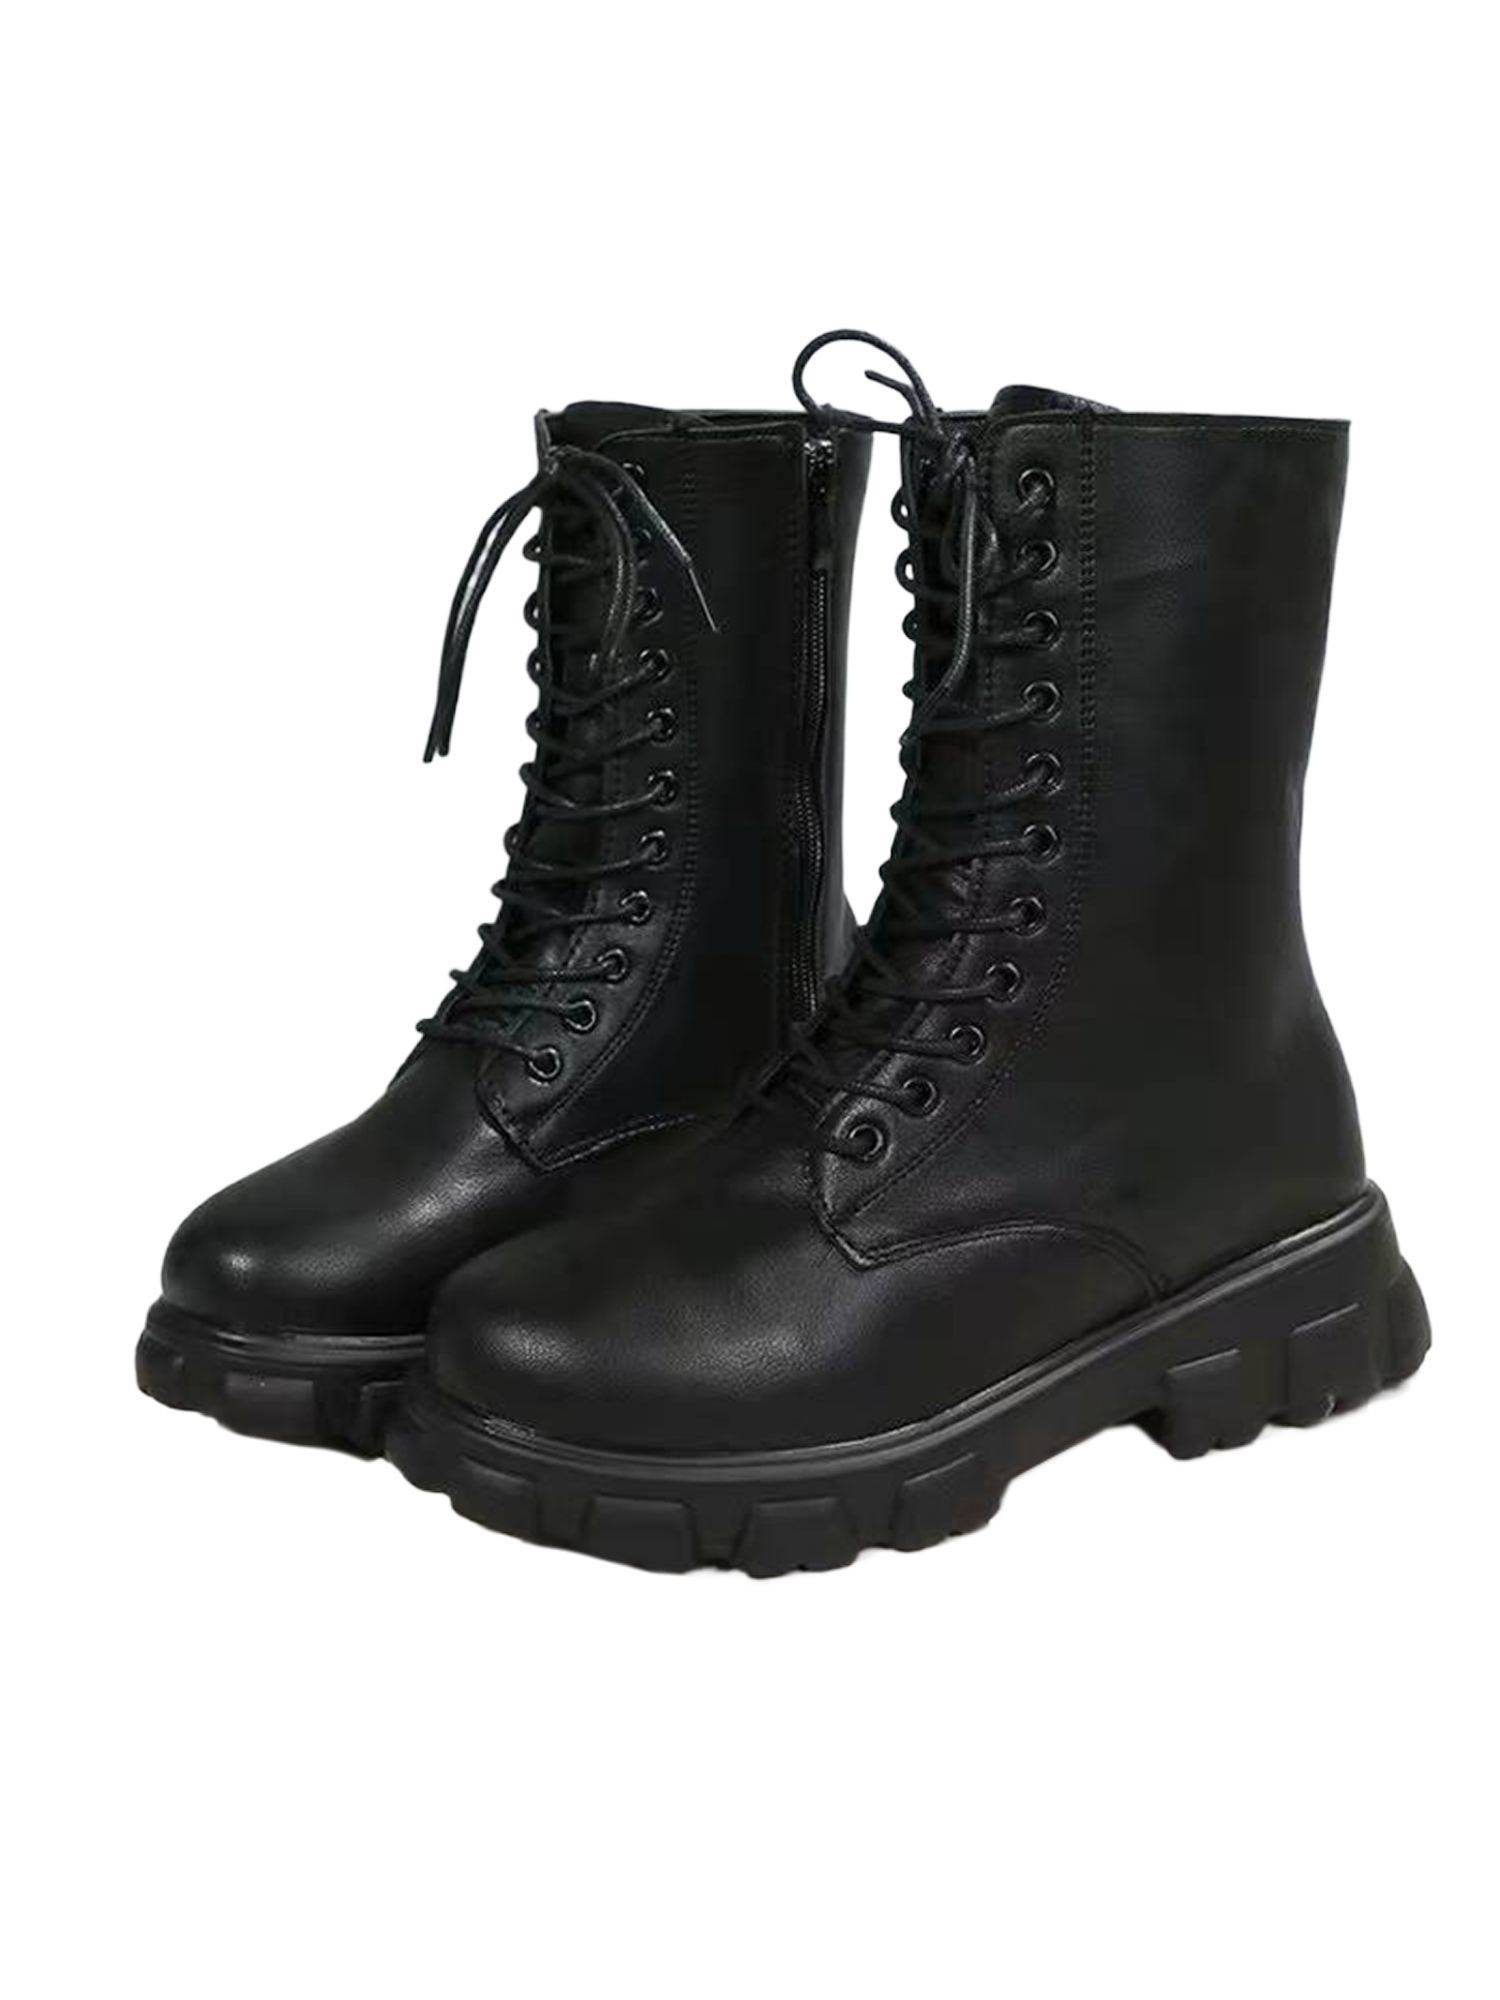 Gomelly Women Comfort Combat Boot Non-Slip Chunky Heel High Top Shoes Military Walking Fashion Lace Up Work Boots Black 8 - image 3 of 6